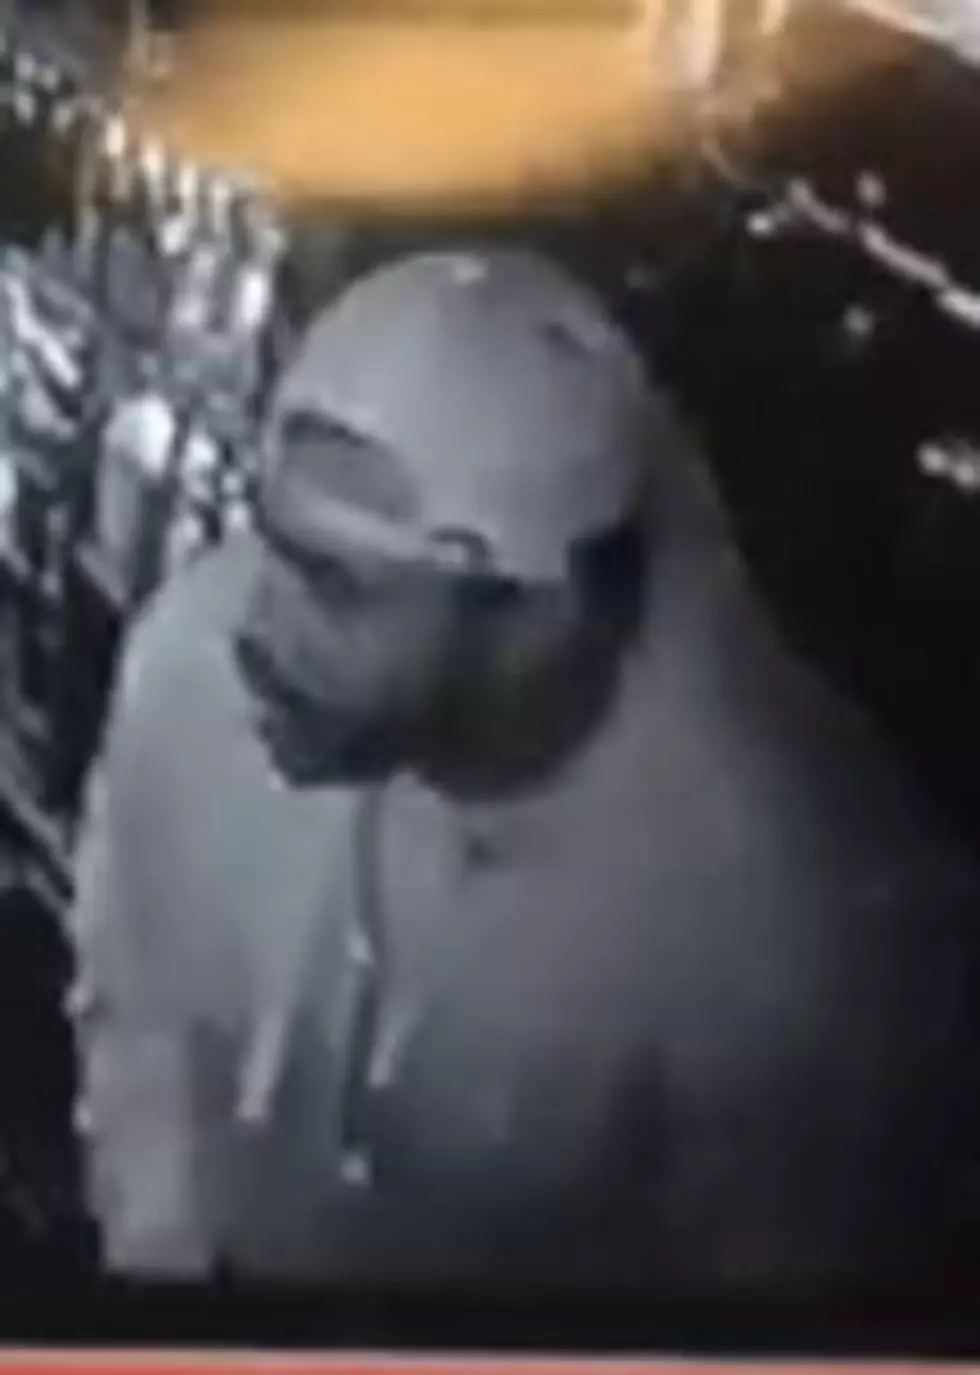 Help Police Find Thieves Who Stole From Local Bar [VIDEO]